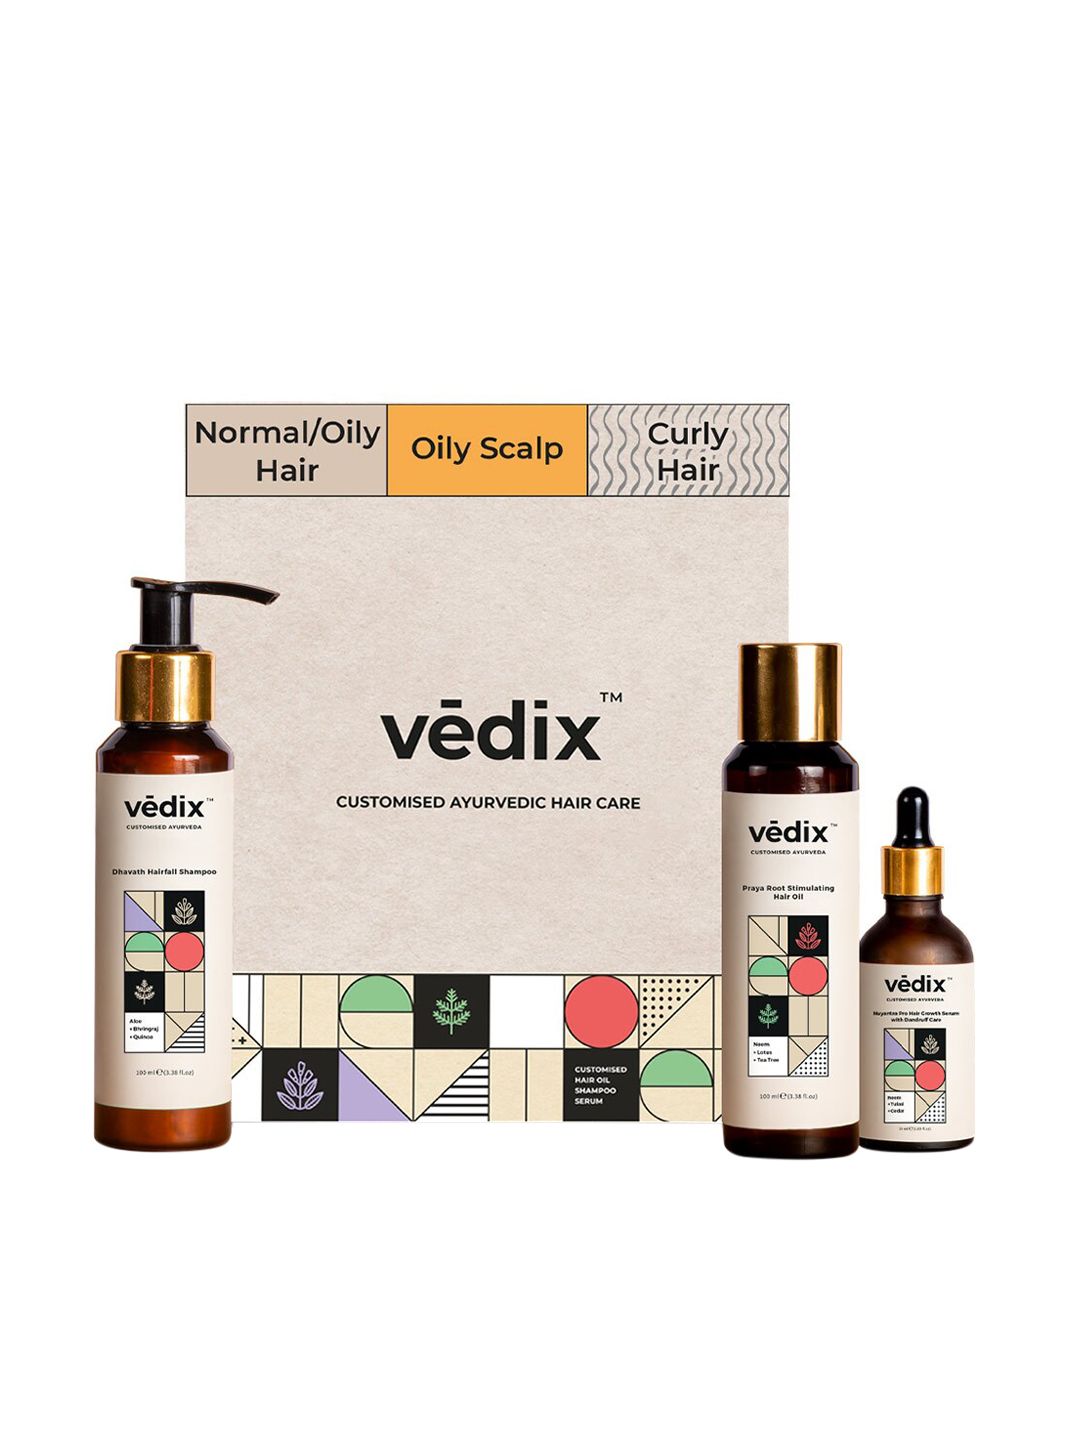 VEDIX Customized Hair Fall & Dandruff Control Regimen for Normal/Oily Hair-Curly Hair Price in India